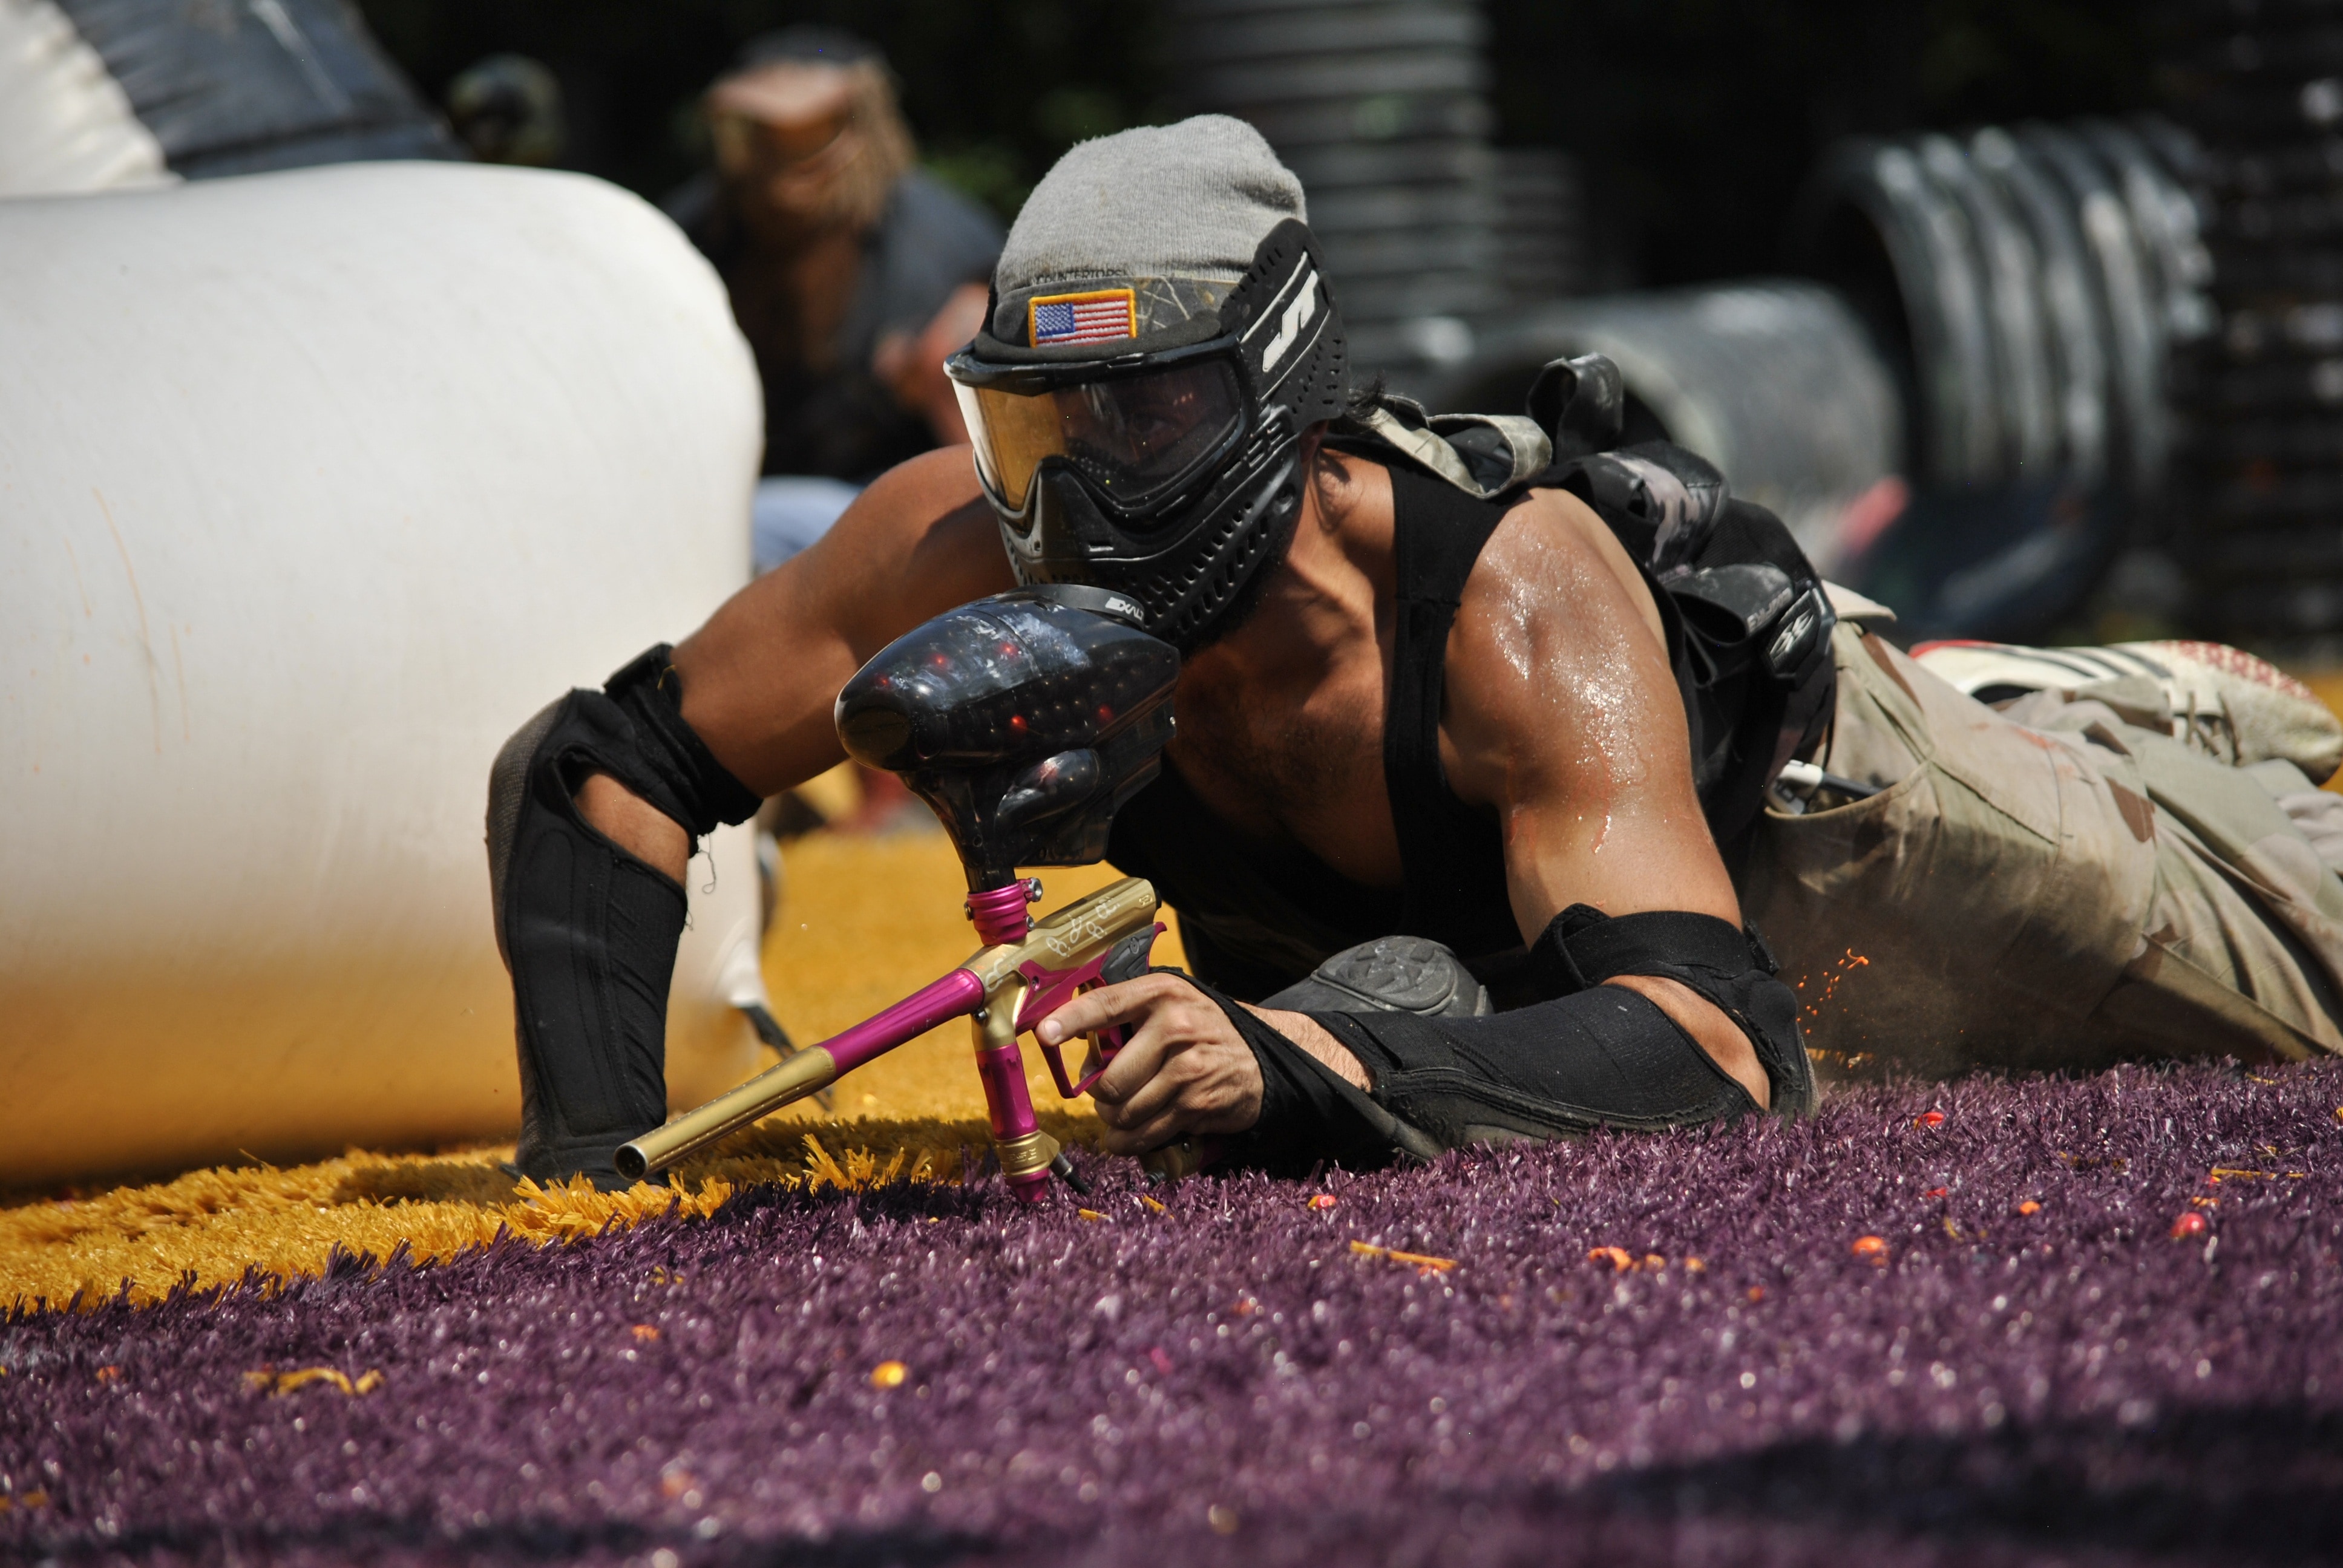 man wearing a black paintball gear holding a black,gold, and pink paintball gun